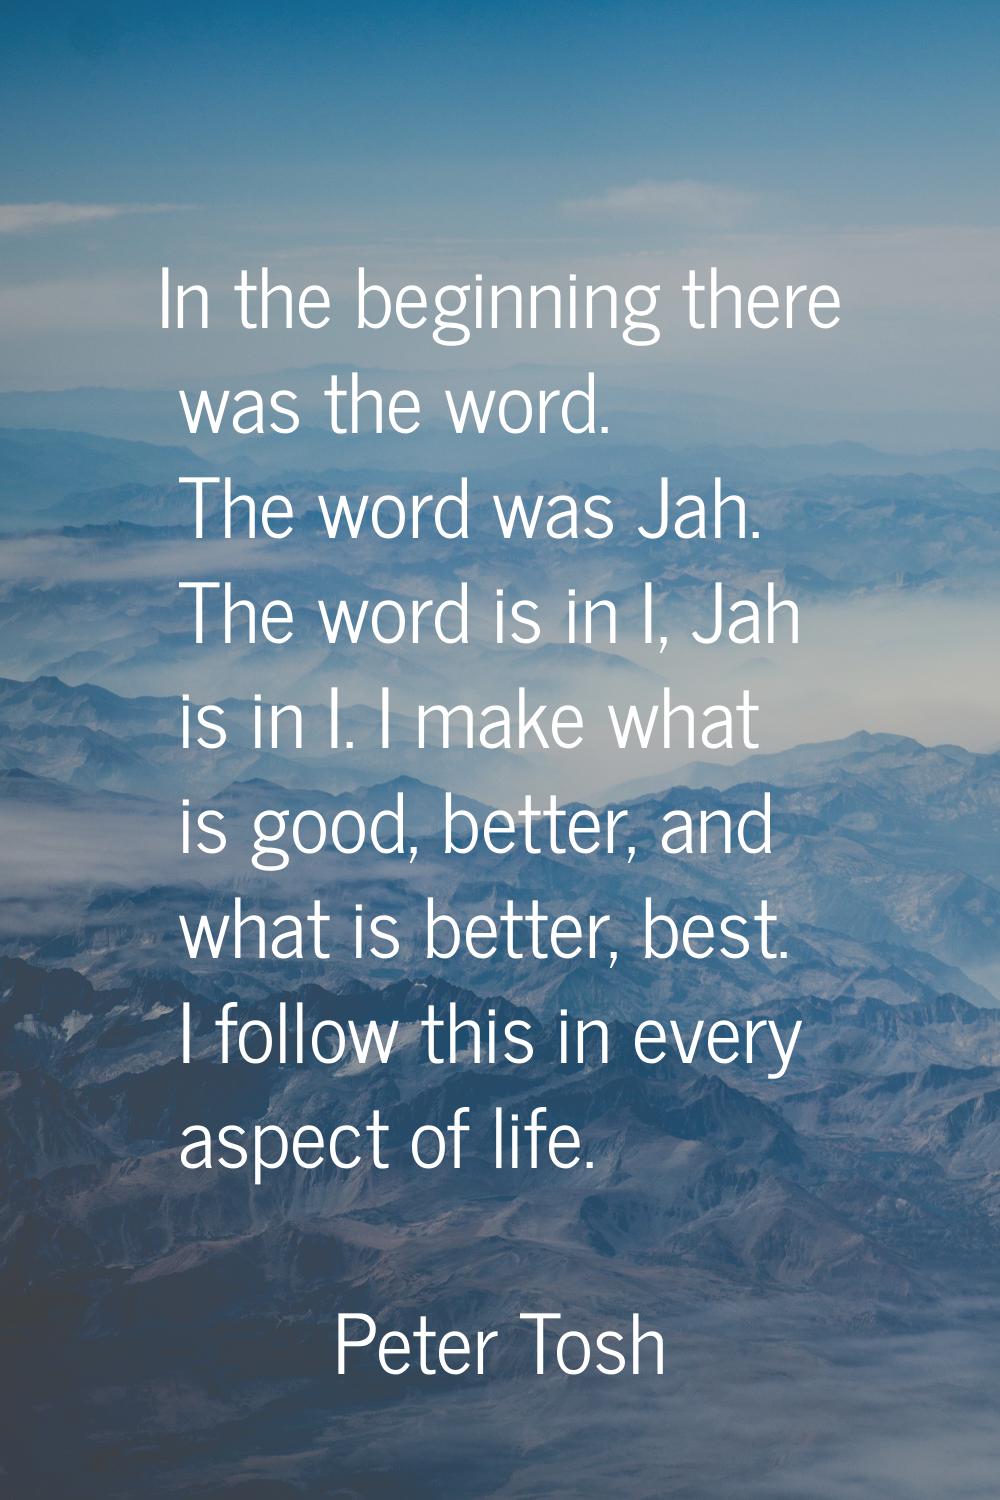 In the beginning there was the word. The word was Jah. The word is in I, Jah is in I. I make what i